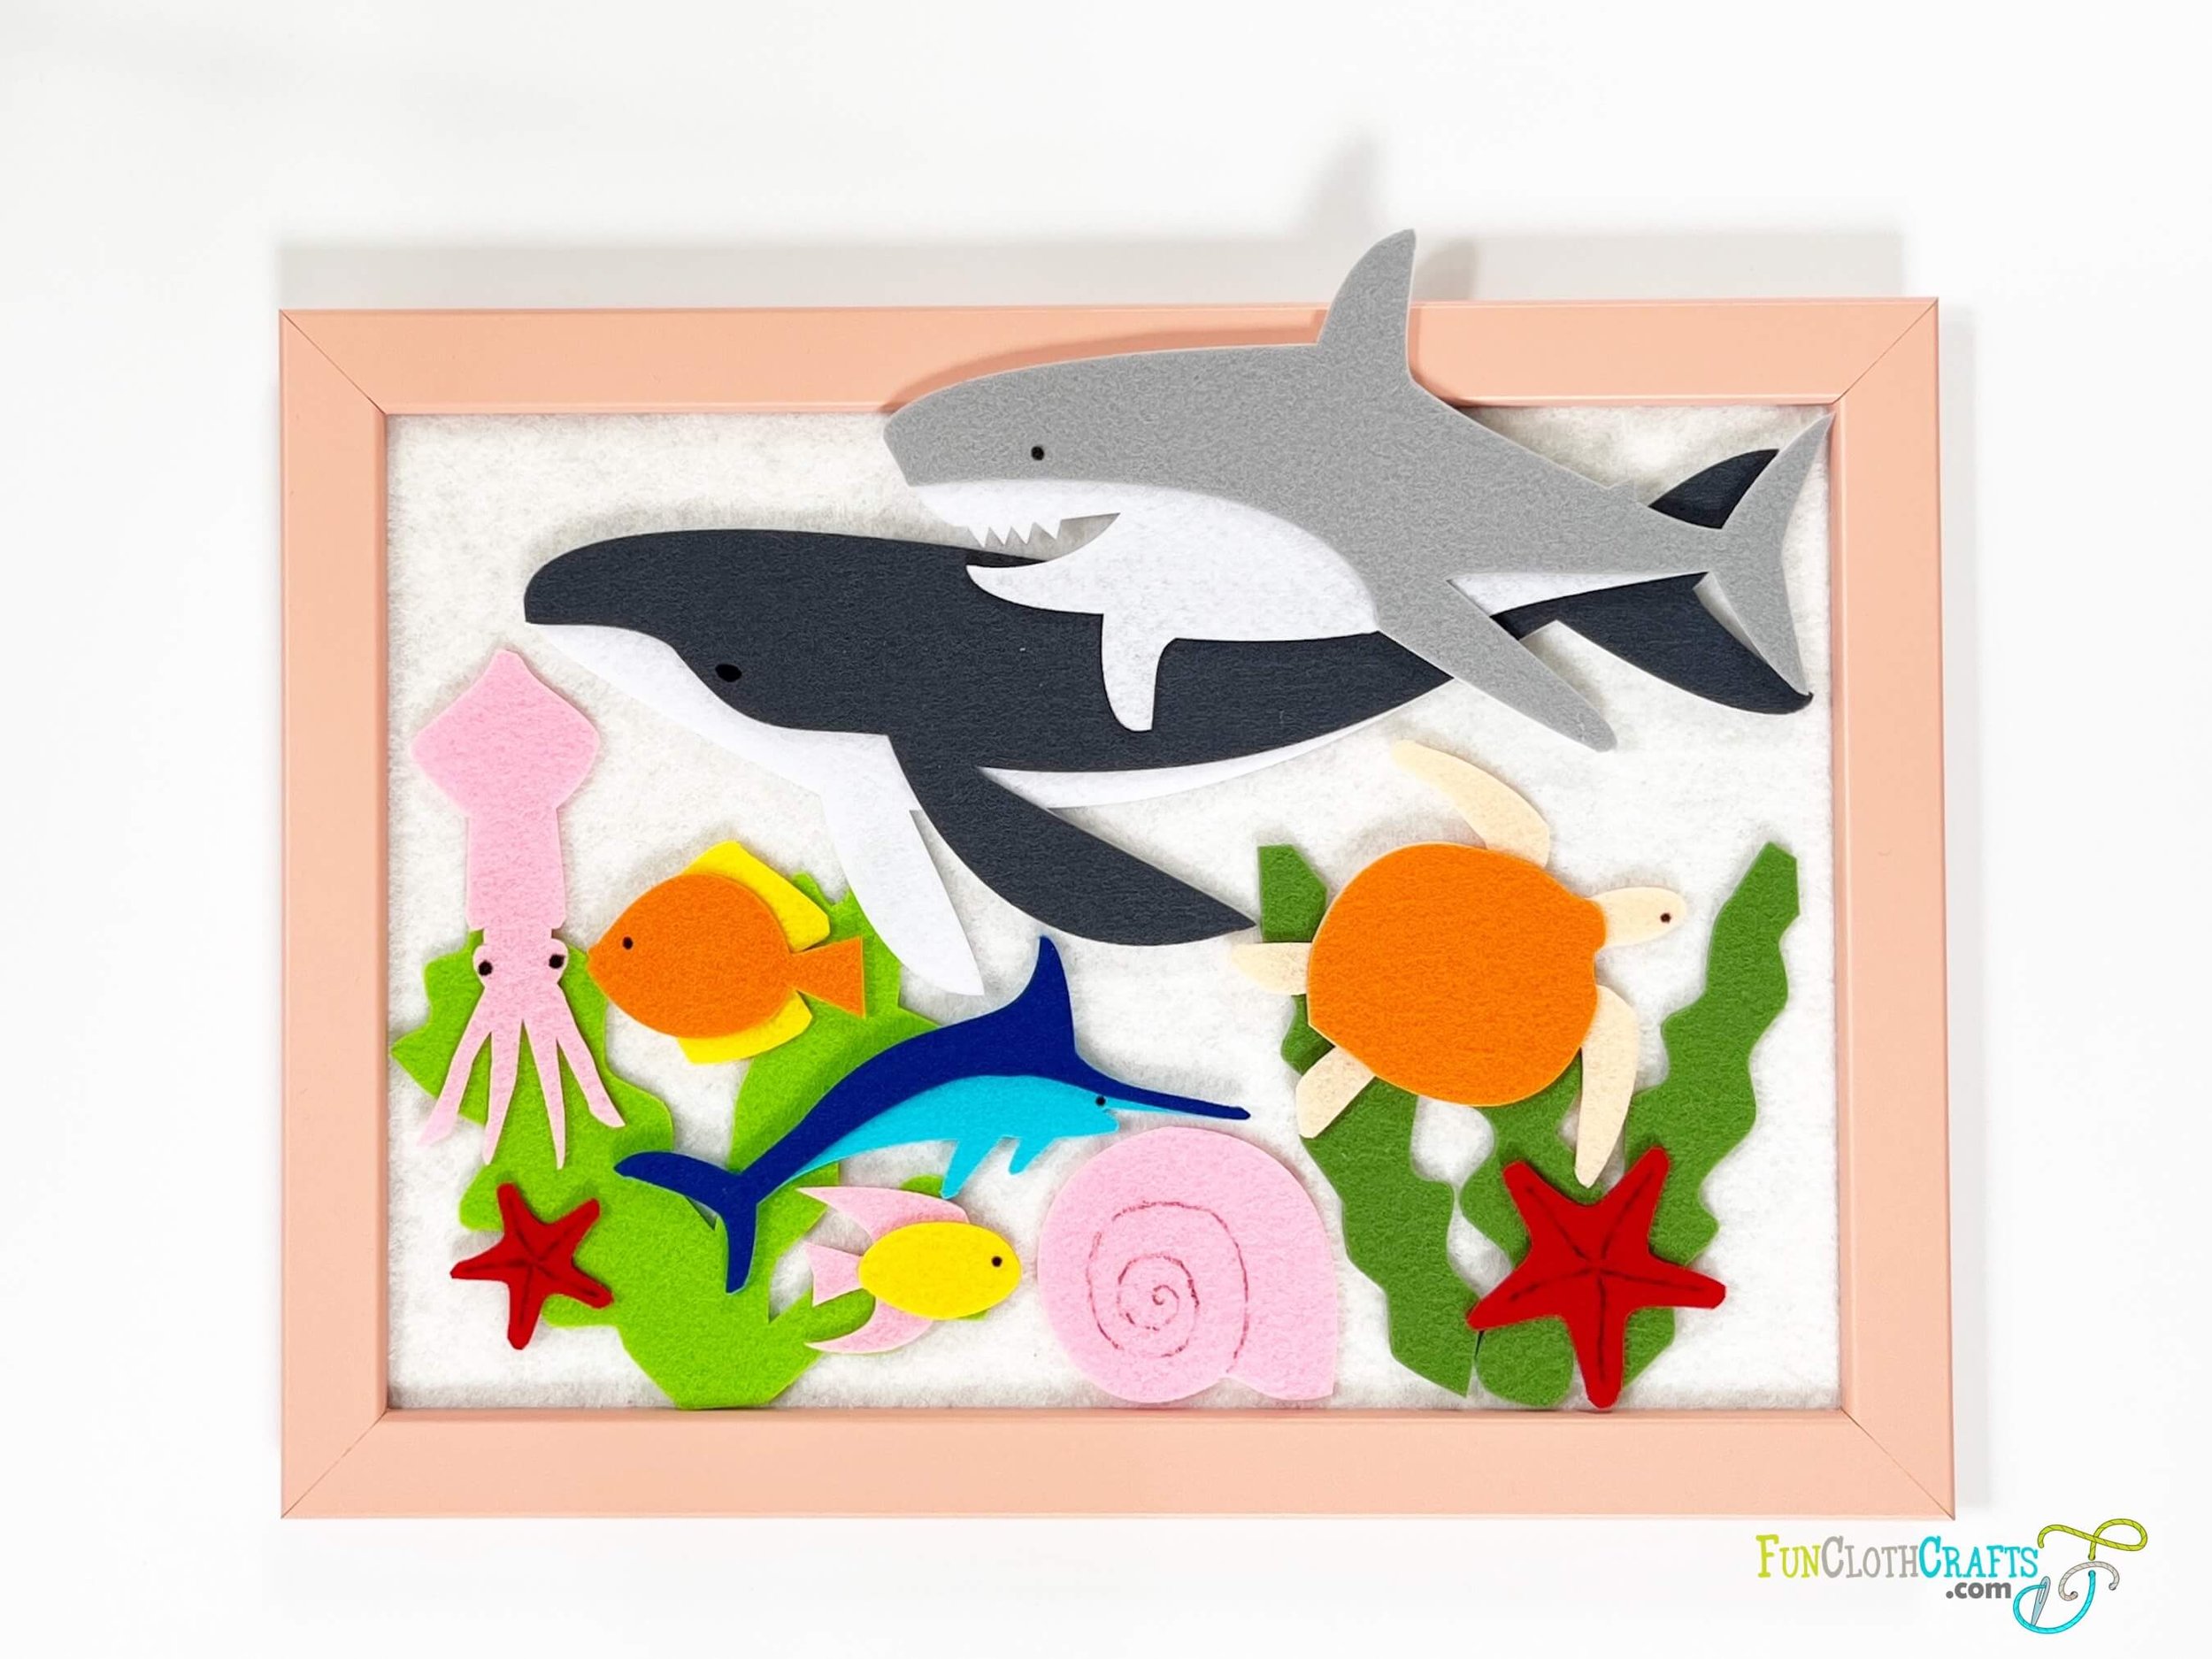 10 Best Felt Board Ideas and How to Make Them